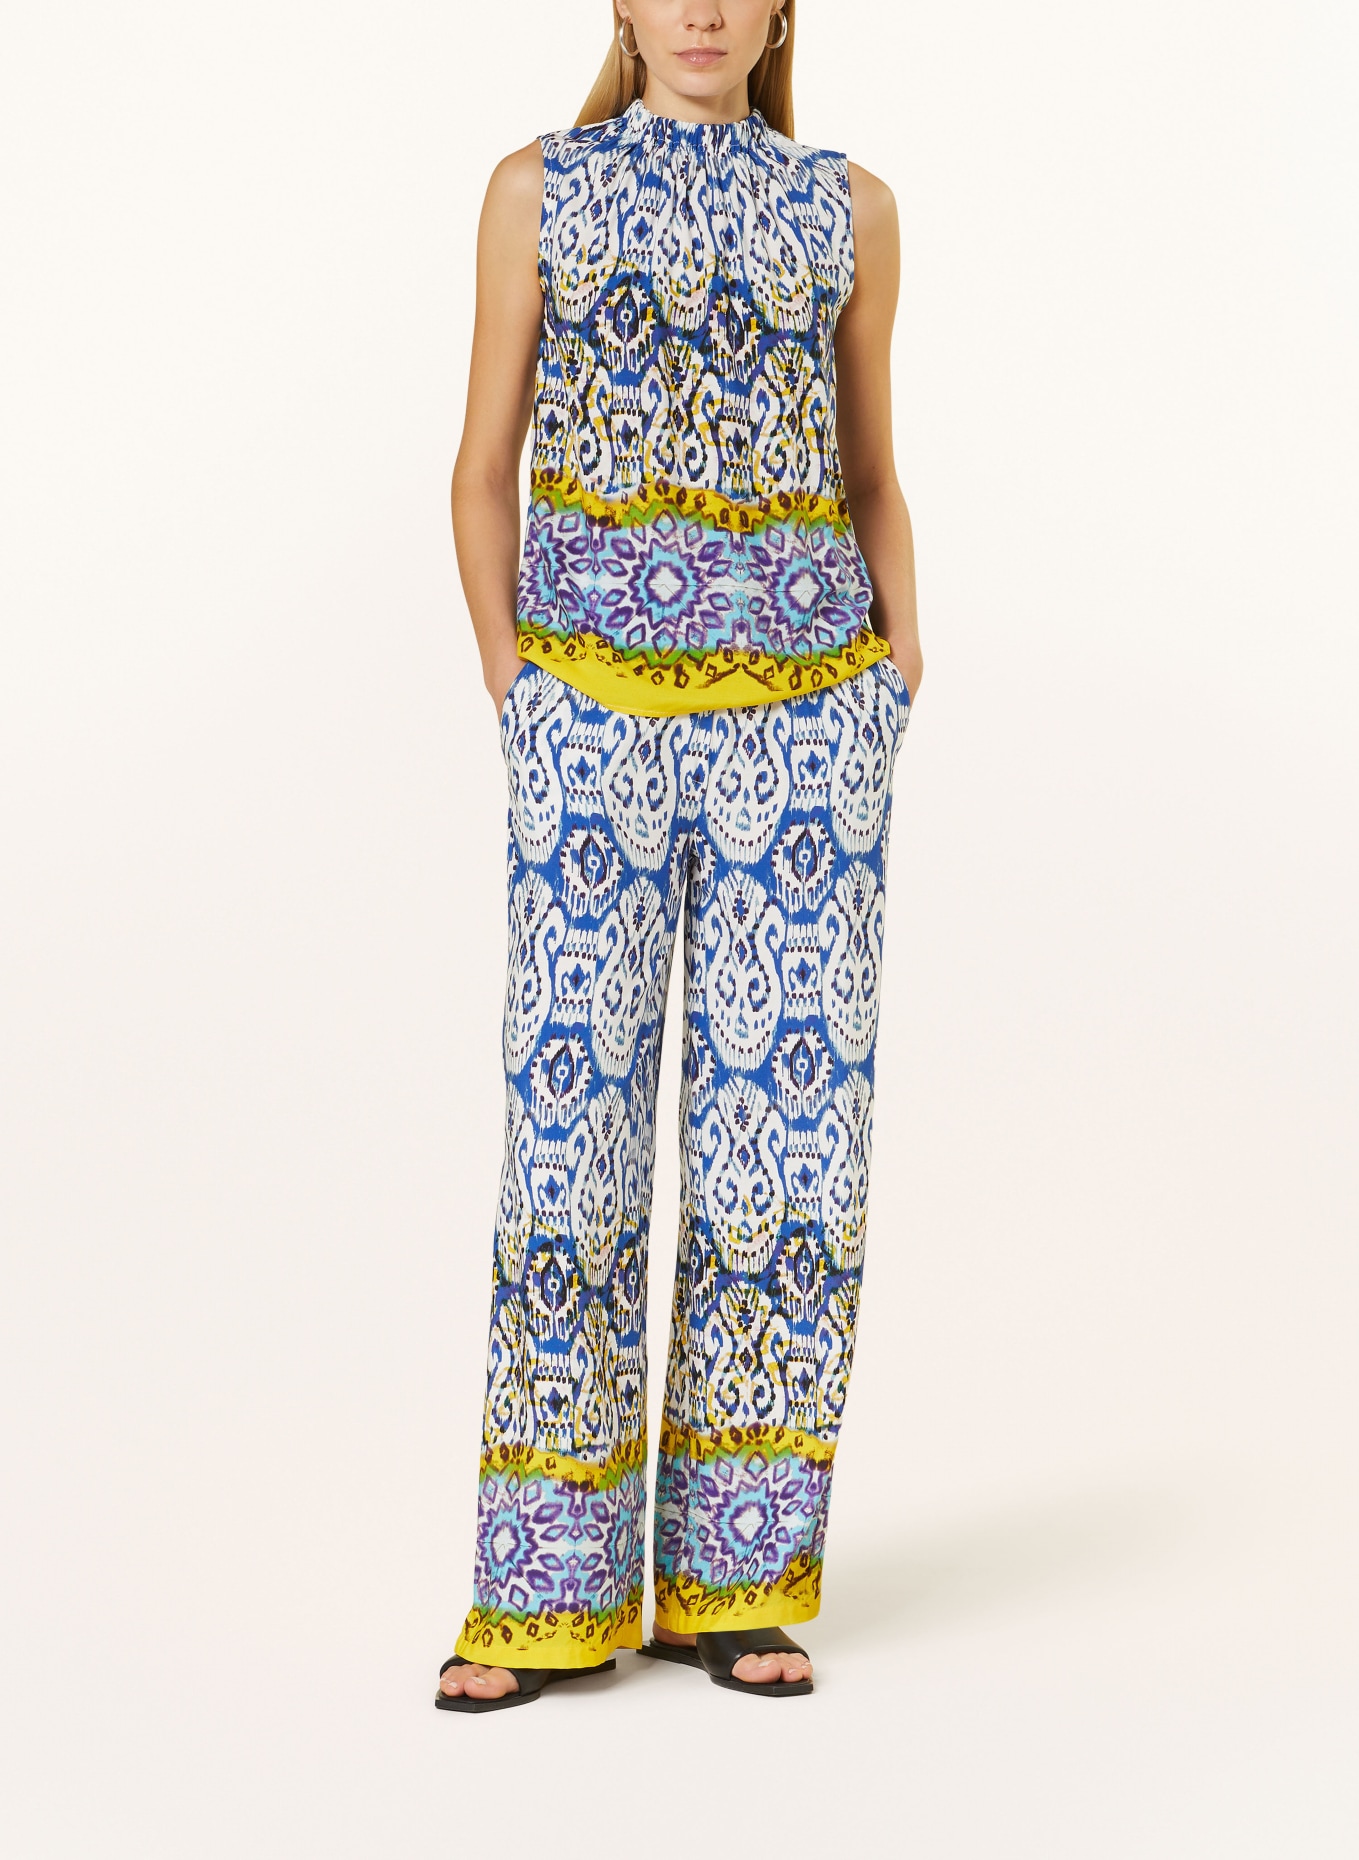 Emily VAN DEN BERGH Pants in jogger style, Color: BLUE/ WHITE/ YELLOW (Image 2)